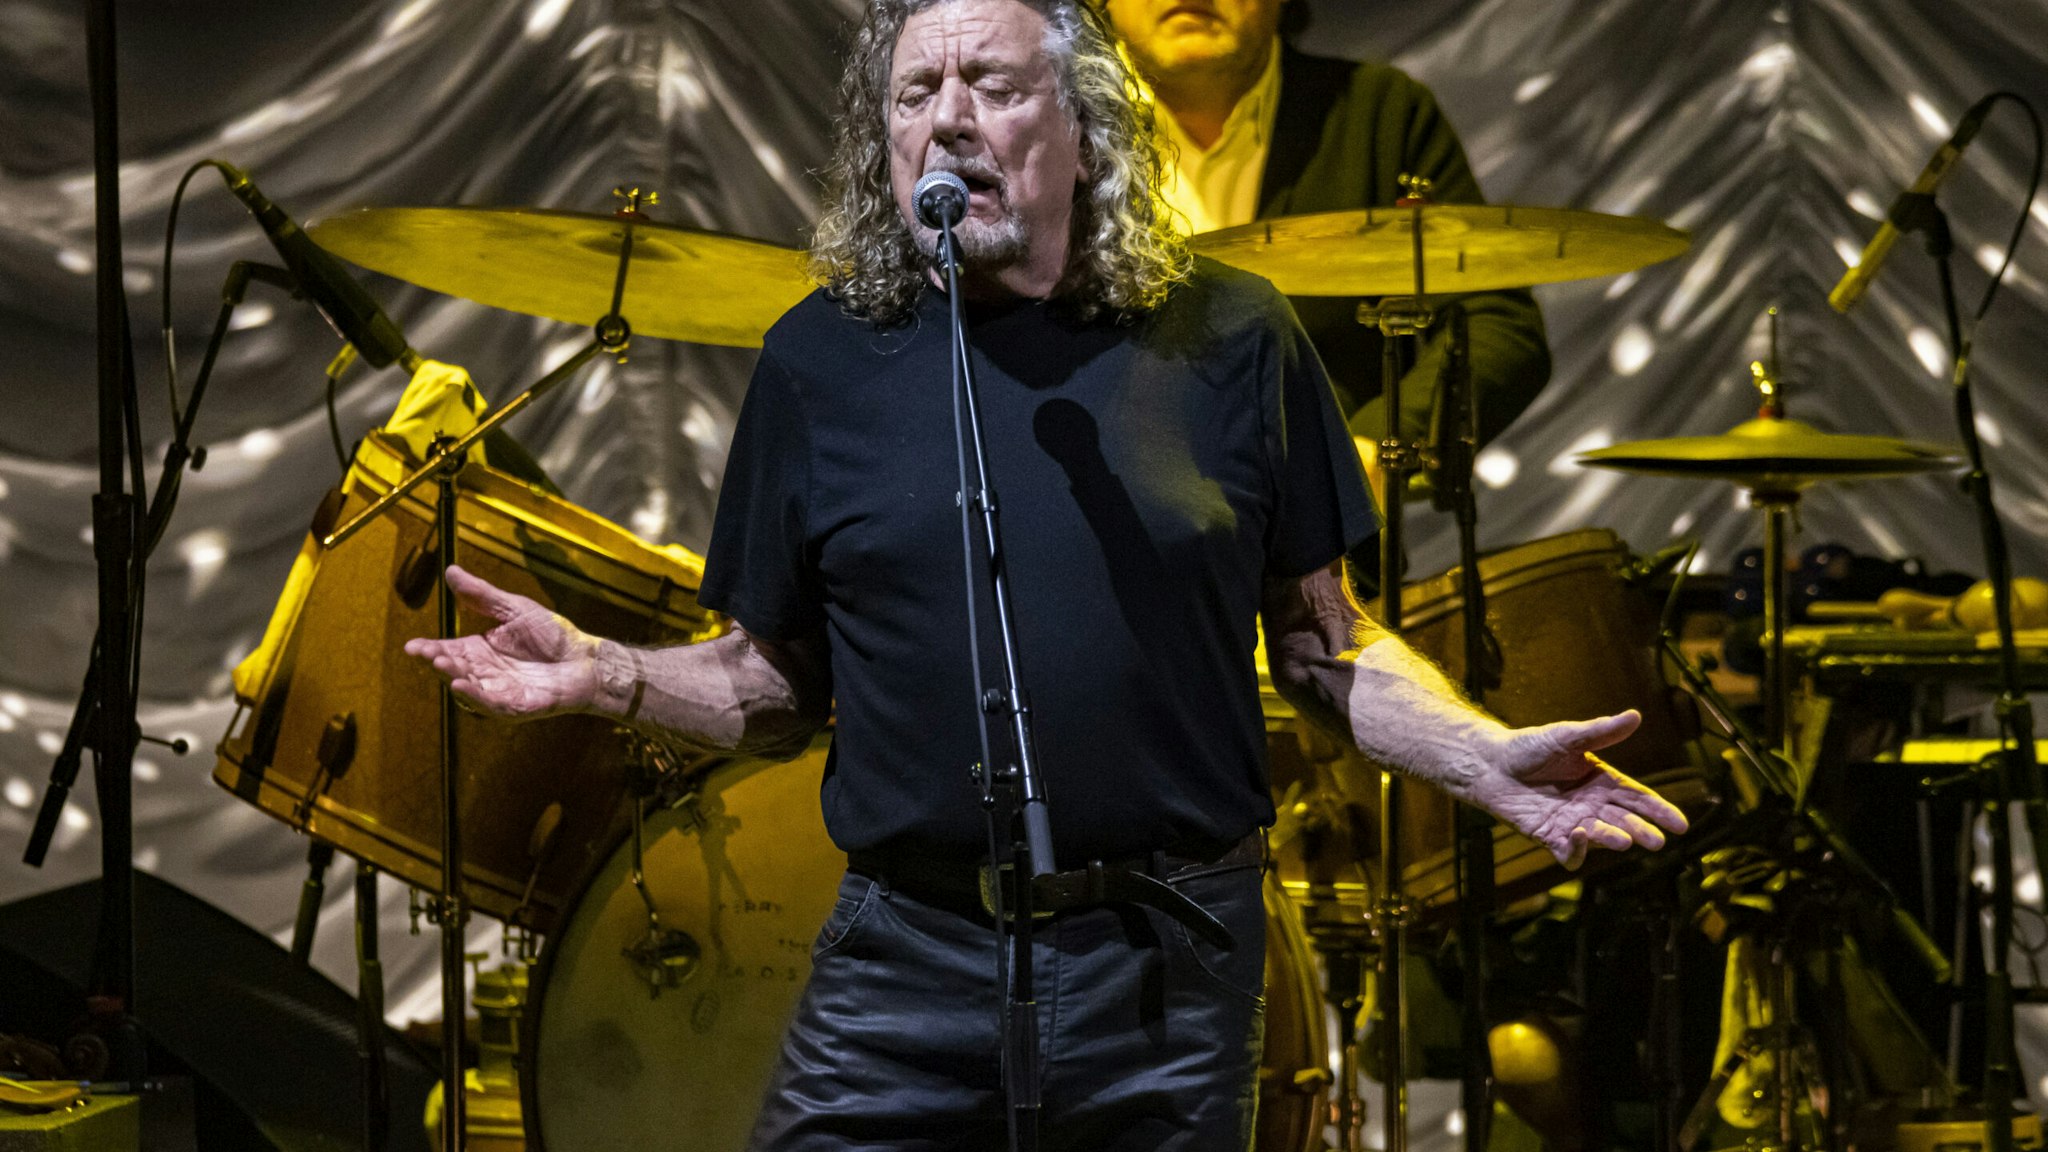 Led Zeppelin frontman Robert Plant just revealed he was offered a cameo role in Game of Thrones, but turned it down